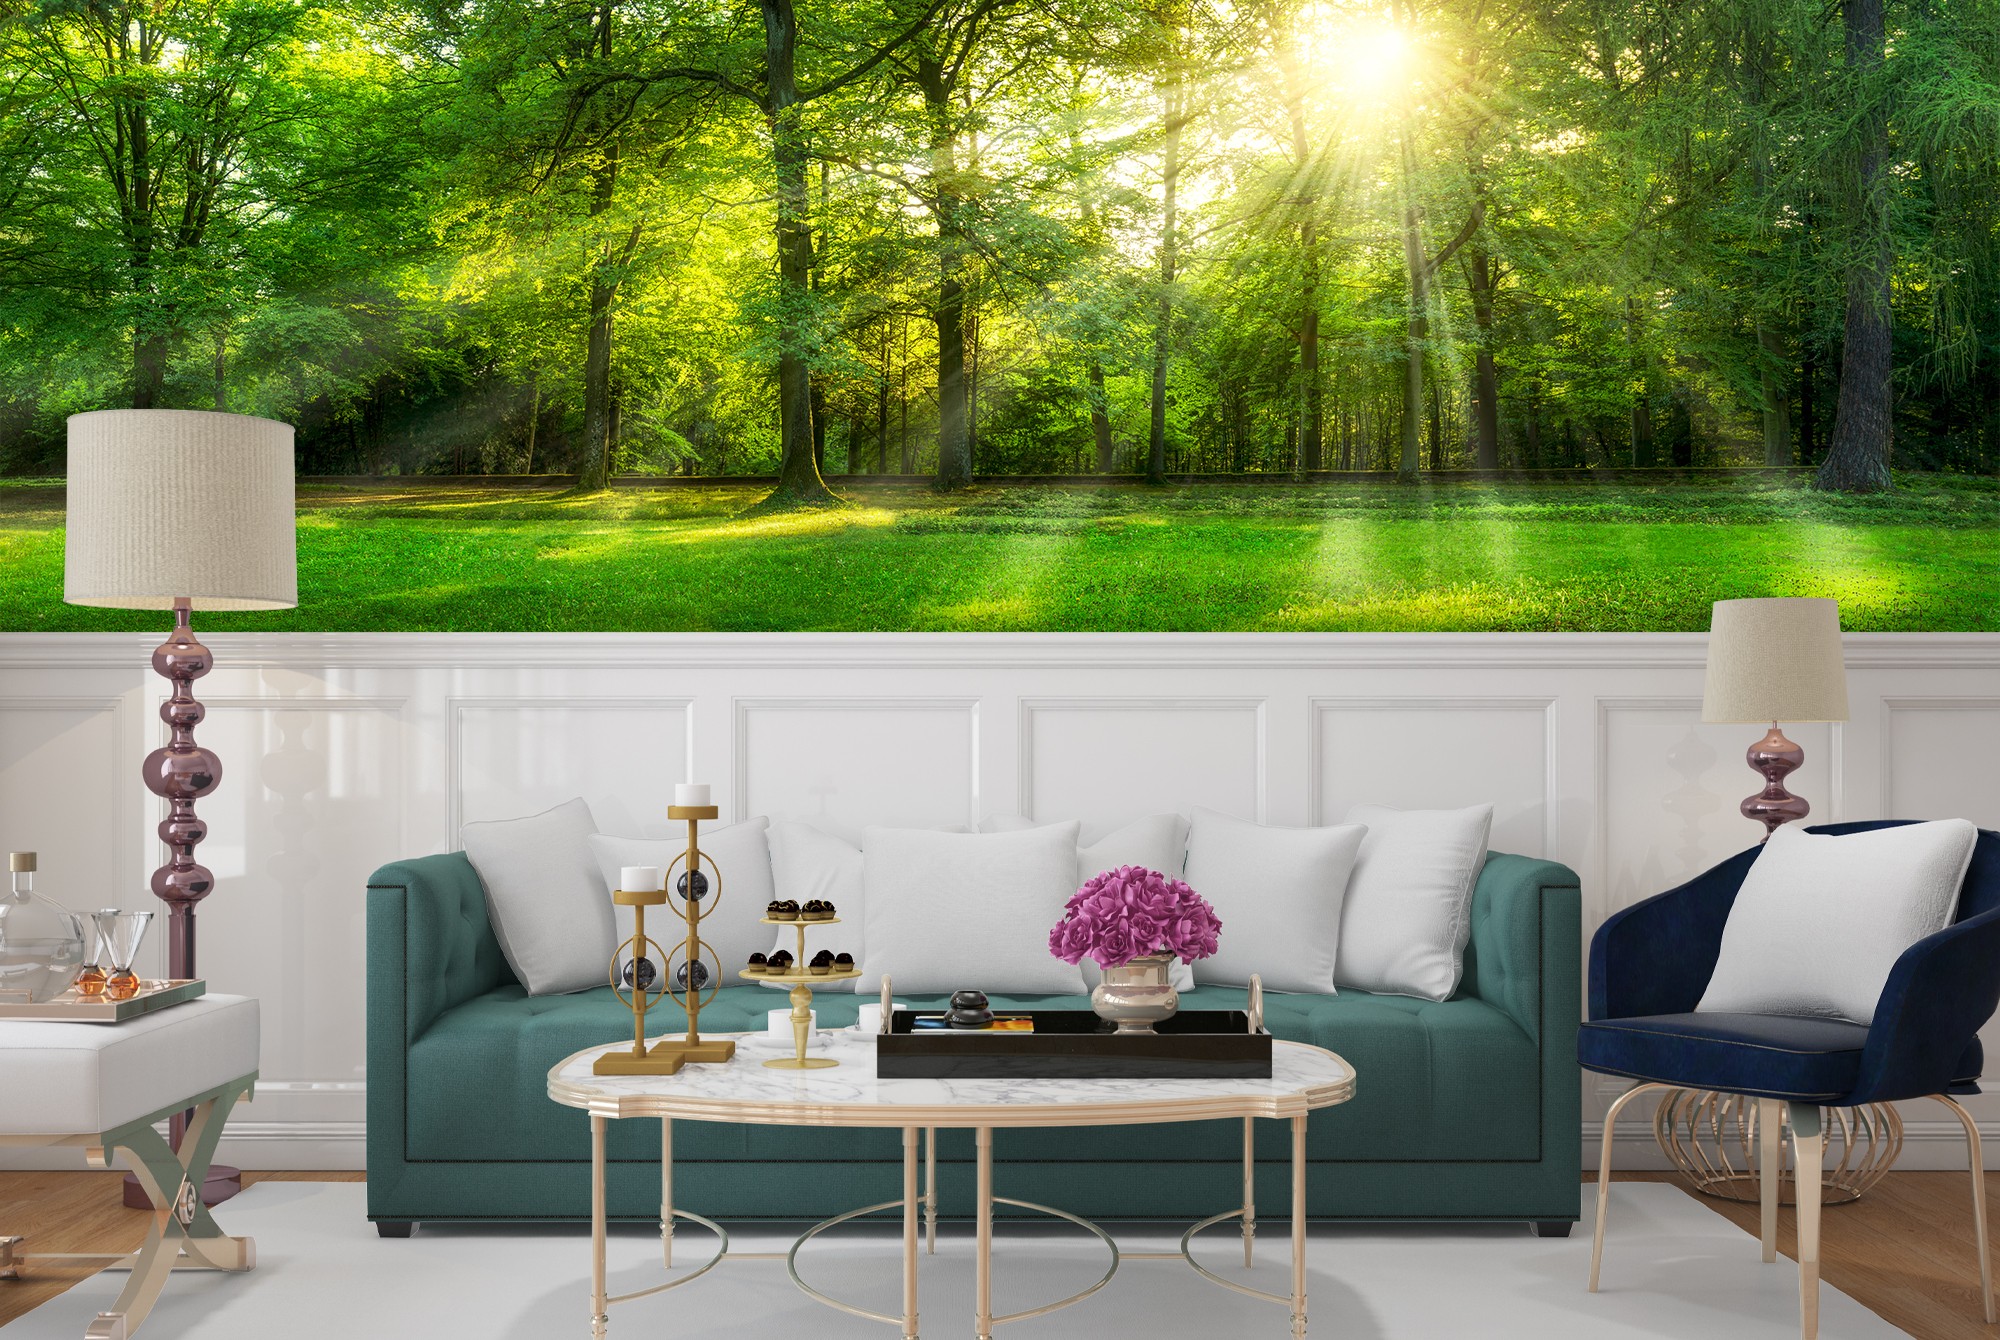 Wall Mural Green Flare Background